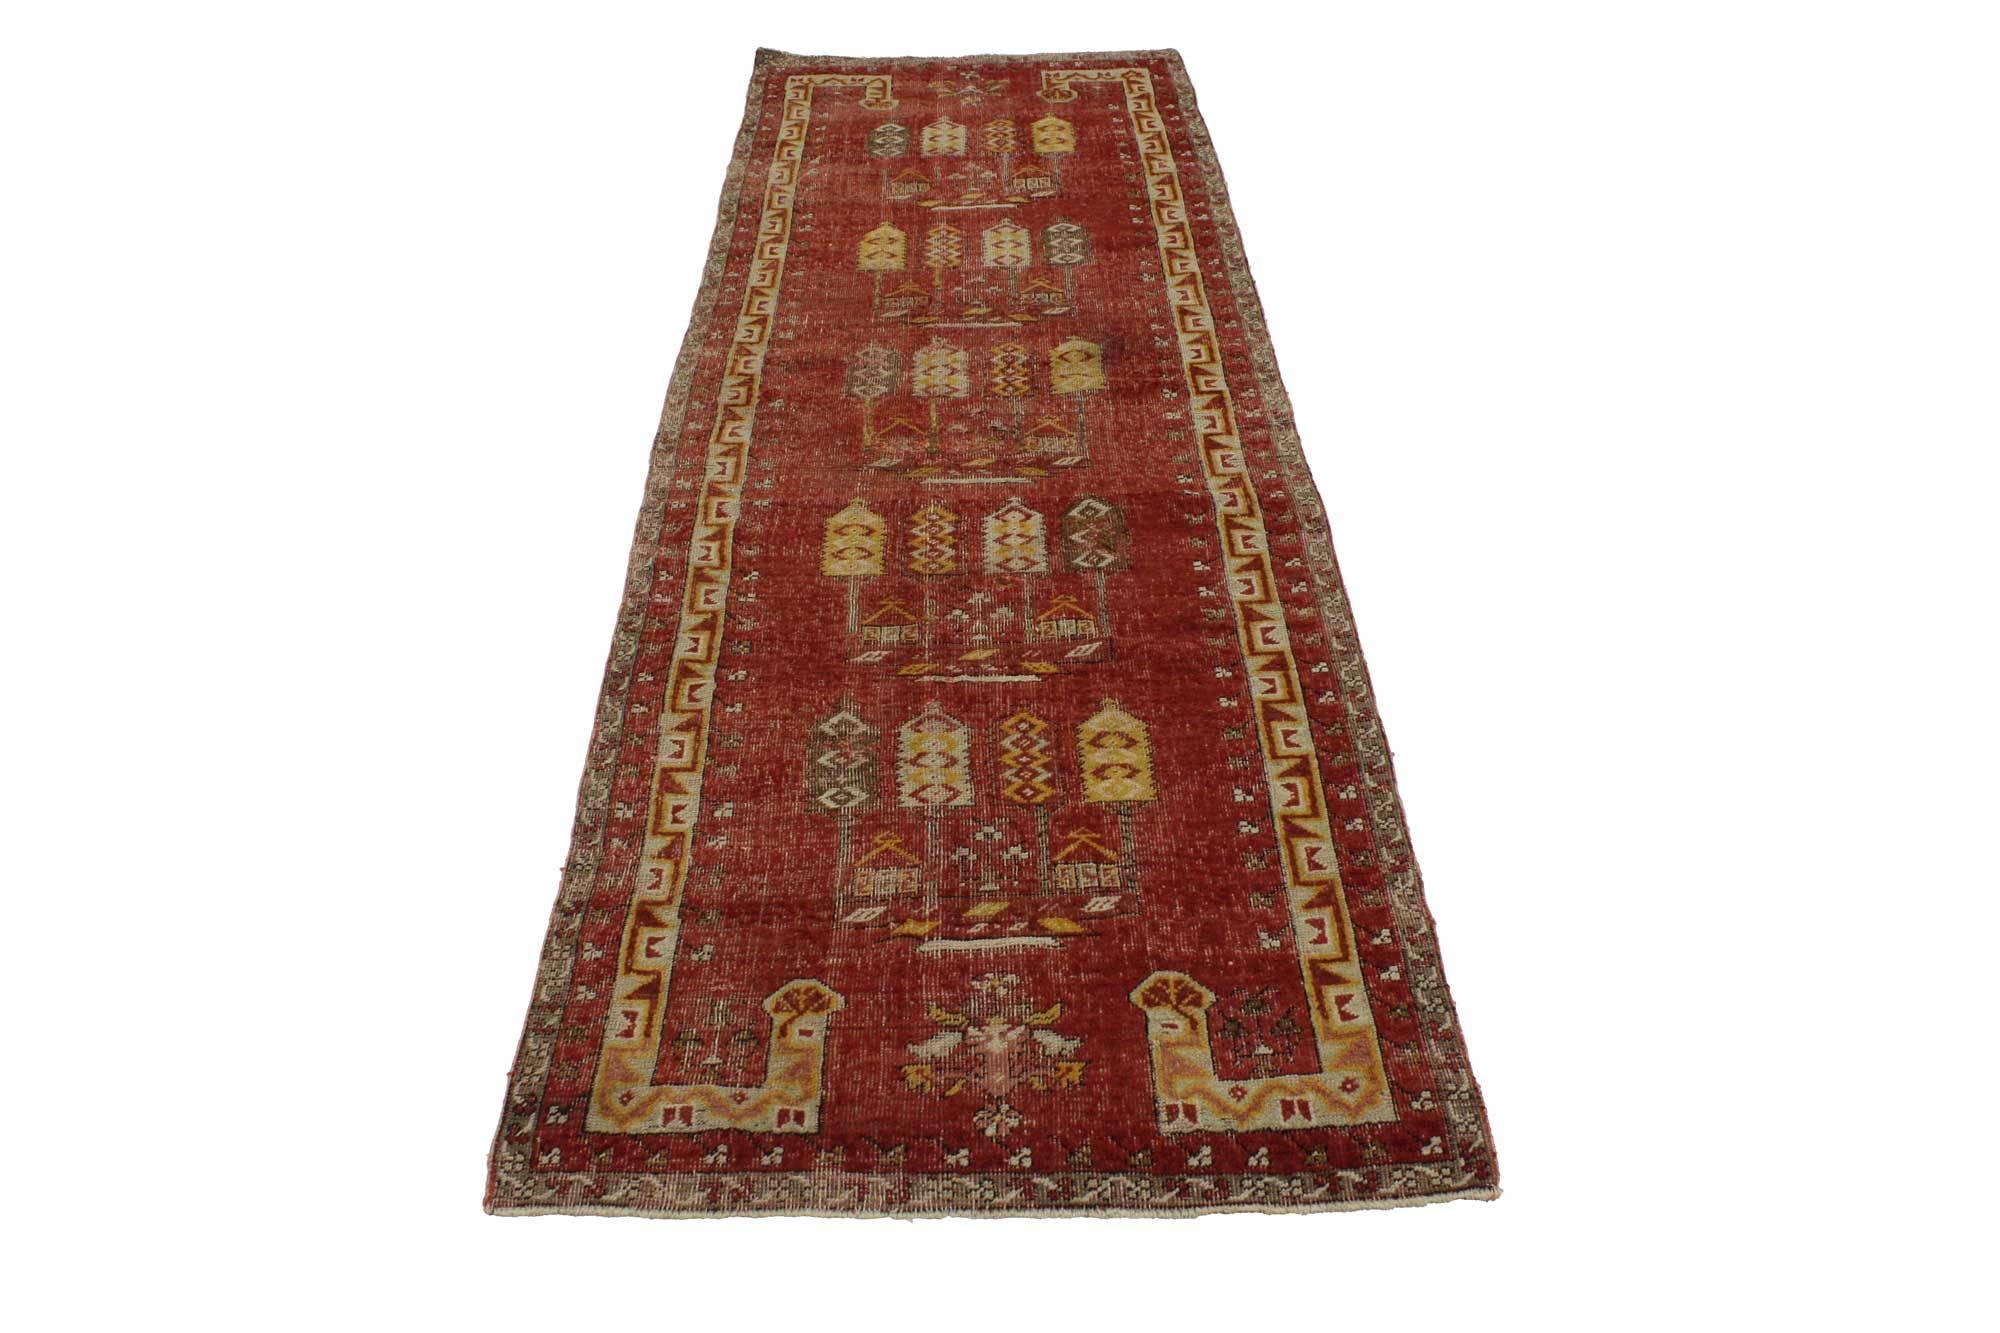 51729 Distressed Vintage Anatolian Kirsehir Prayer Rug with Graveyard Marker Design and Spanish Revival Mission Style 02'07 x 08'07 From Esmaili Rugs Collection. This hand-knotted wool vintage Turkish Oushak runner features pictorial design with